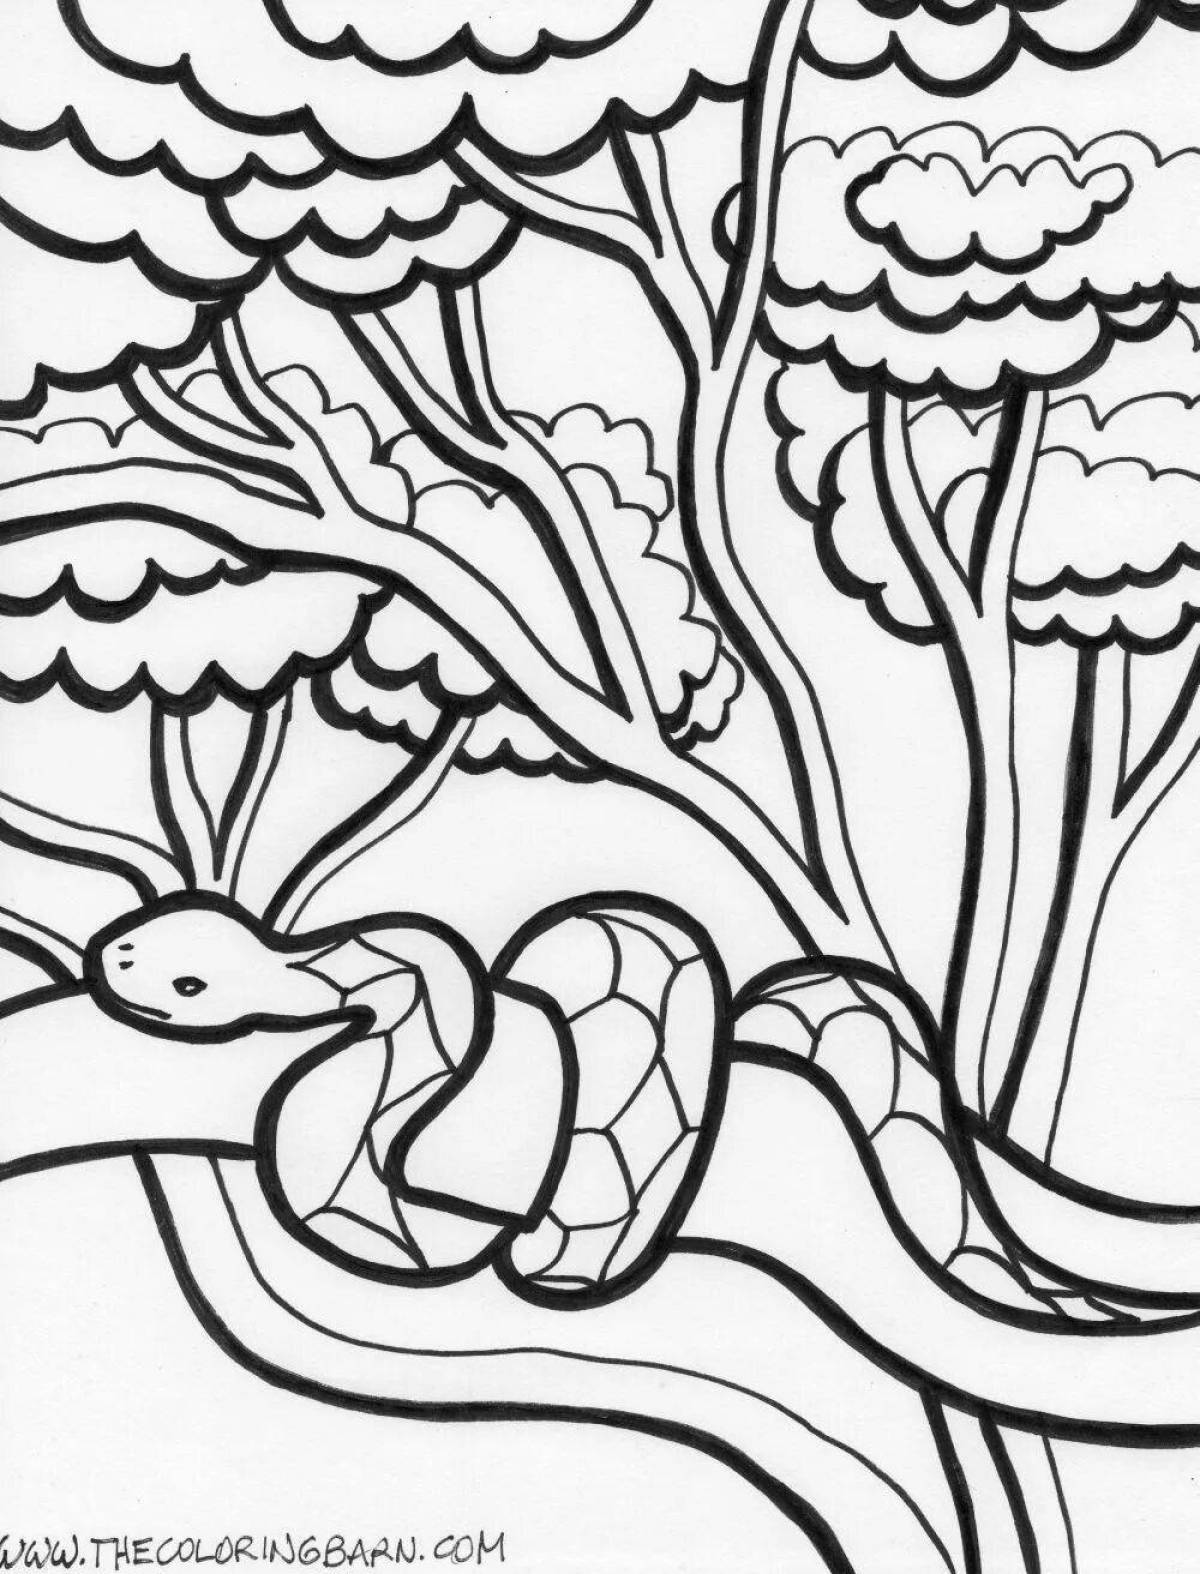 Intriguing tropical animal coloring book